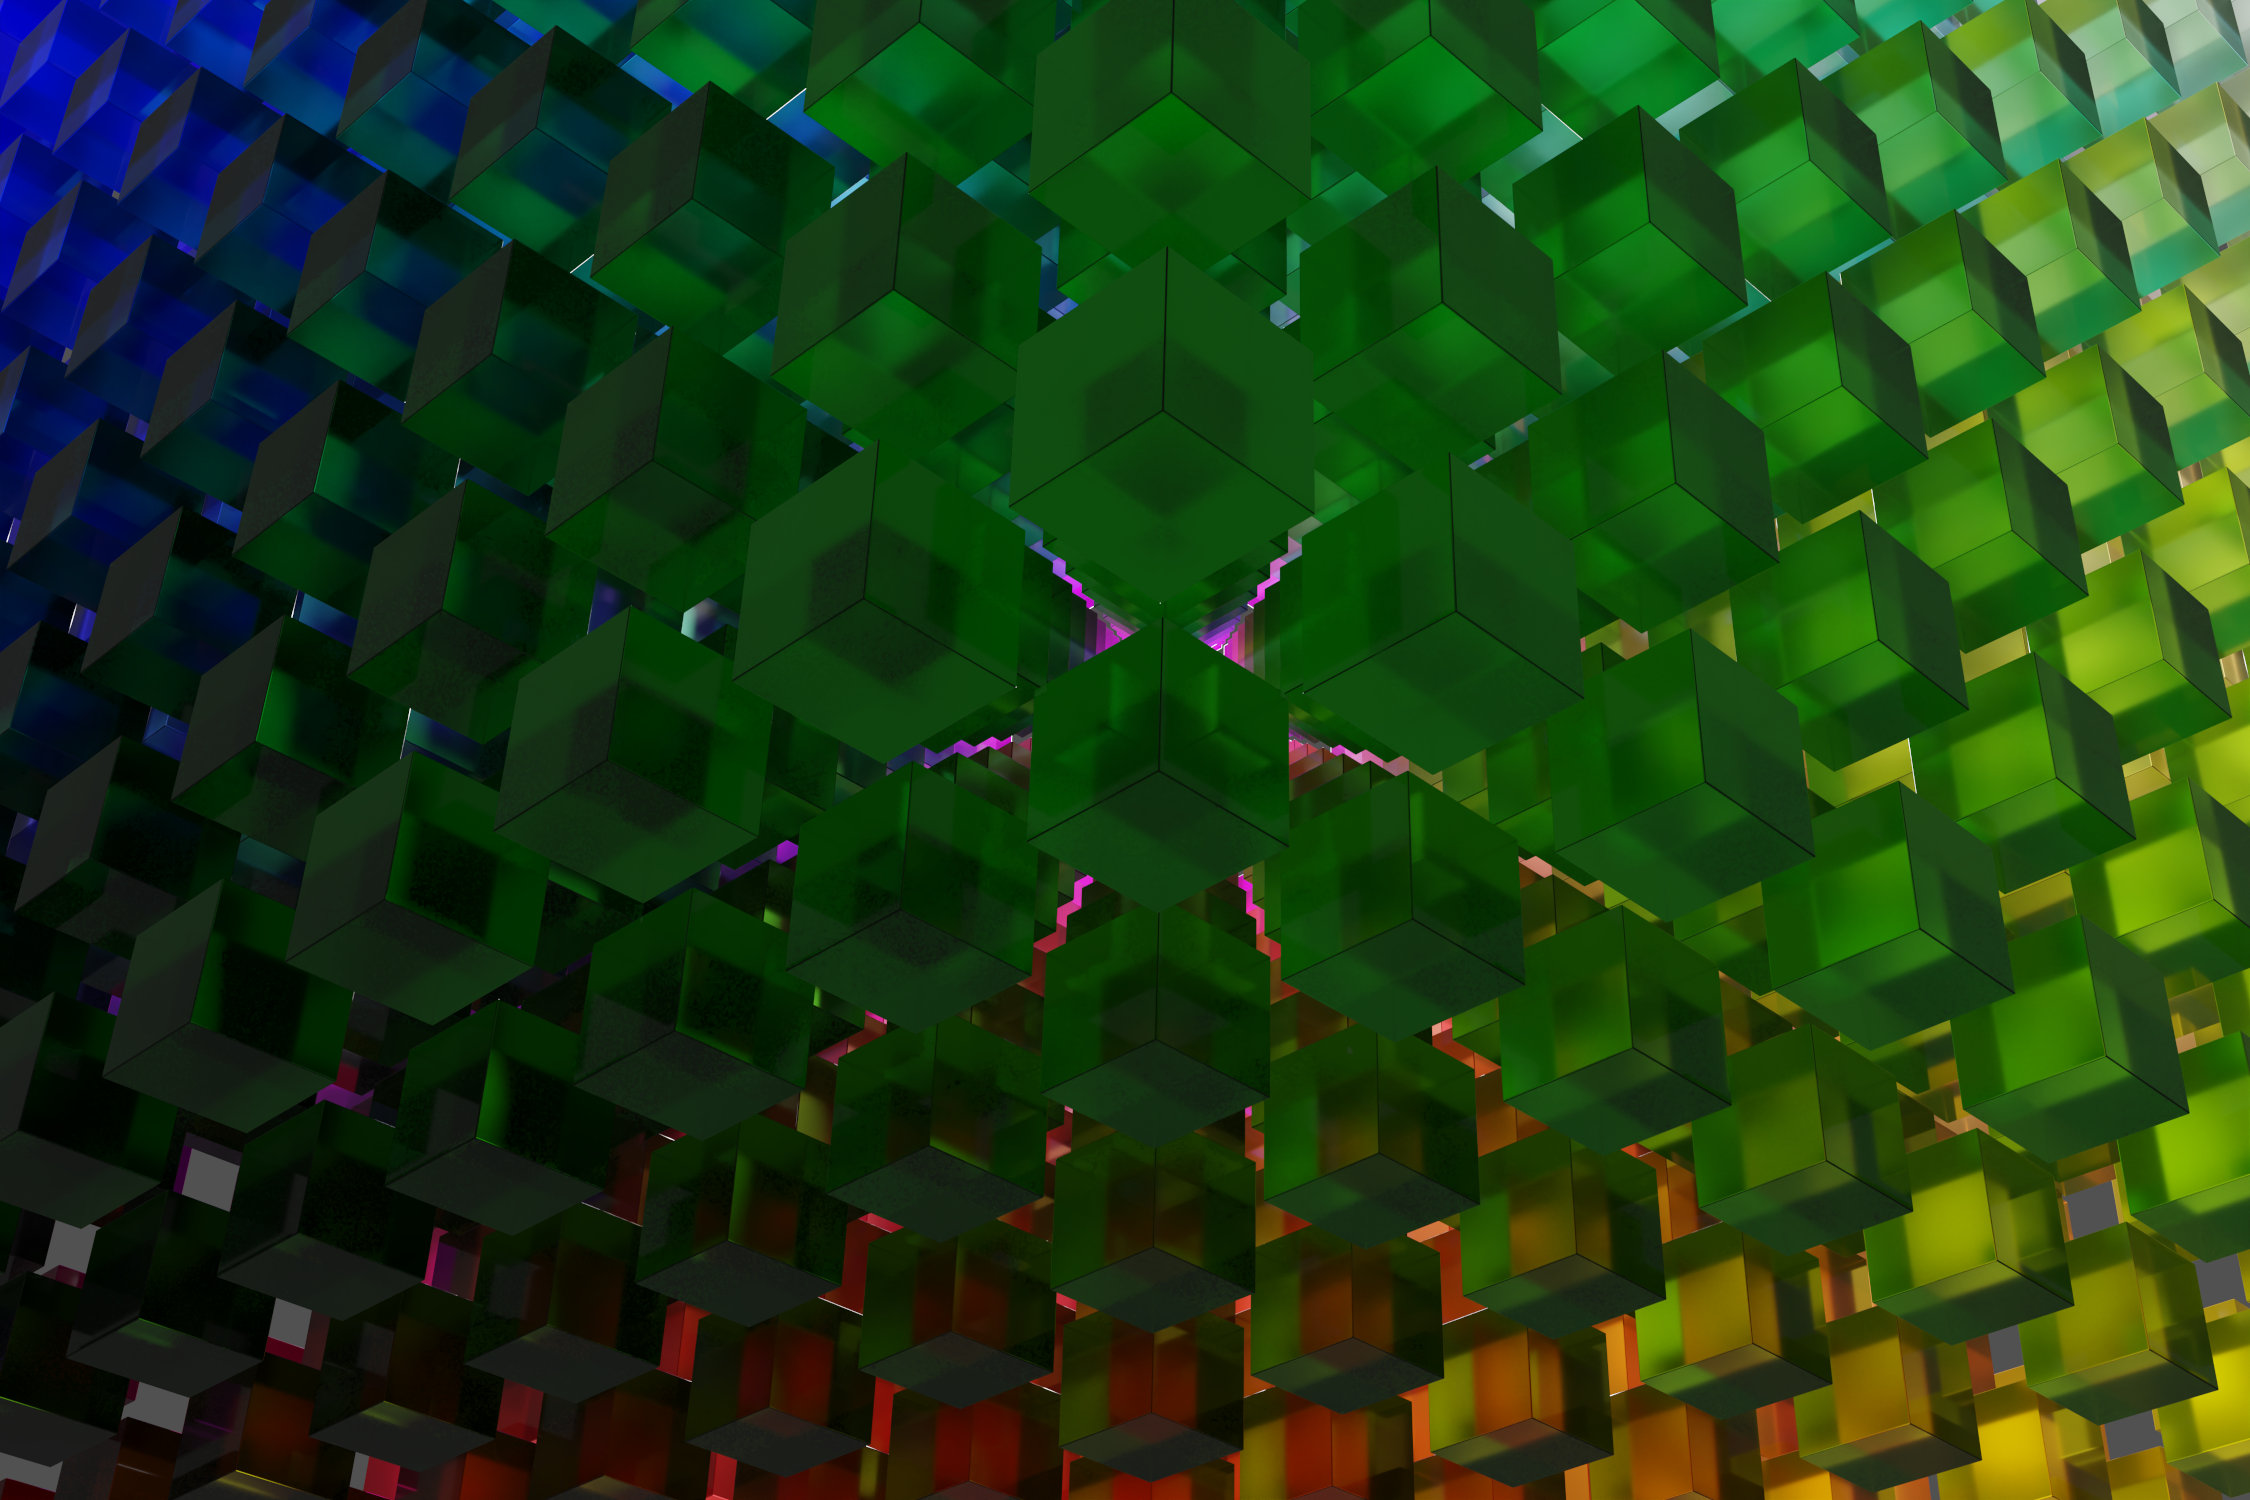 Virtual abstract scenery, Scenic abstract digital contemporary art, Raytracing, Computer-rendered image, 2023. Fine Art Print 60 x 40cm on photographic paper, mounted on Alu-Dibond®. Limited Edition 1/1. 1000 colored glass cubes form one big cube.